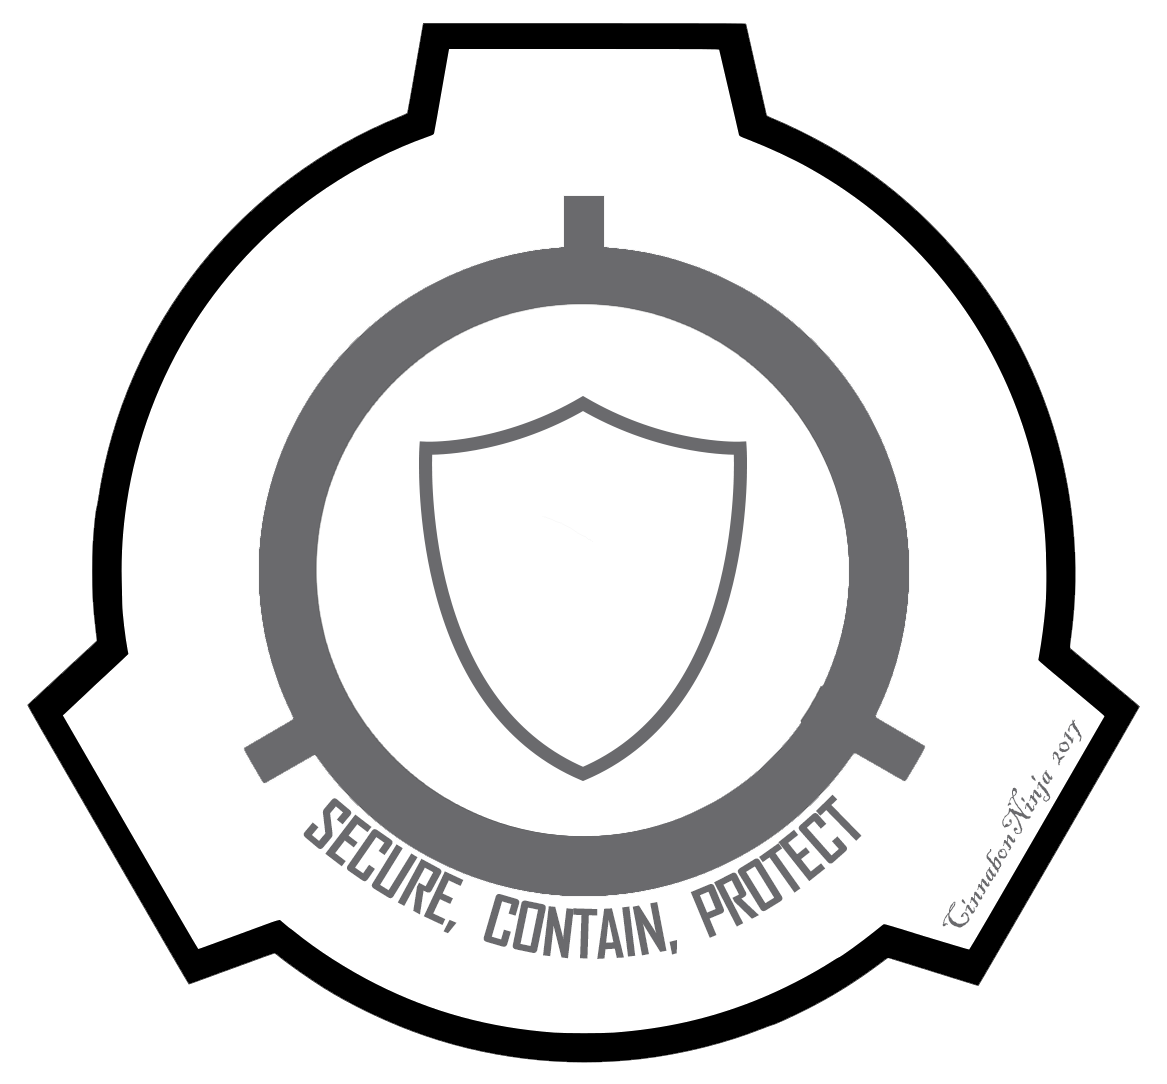 The Security Department (SD) is a division of the SCP Foundation